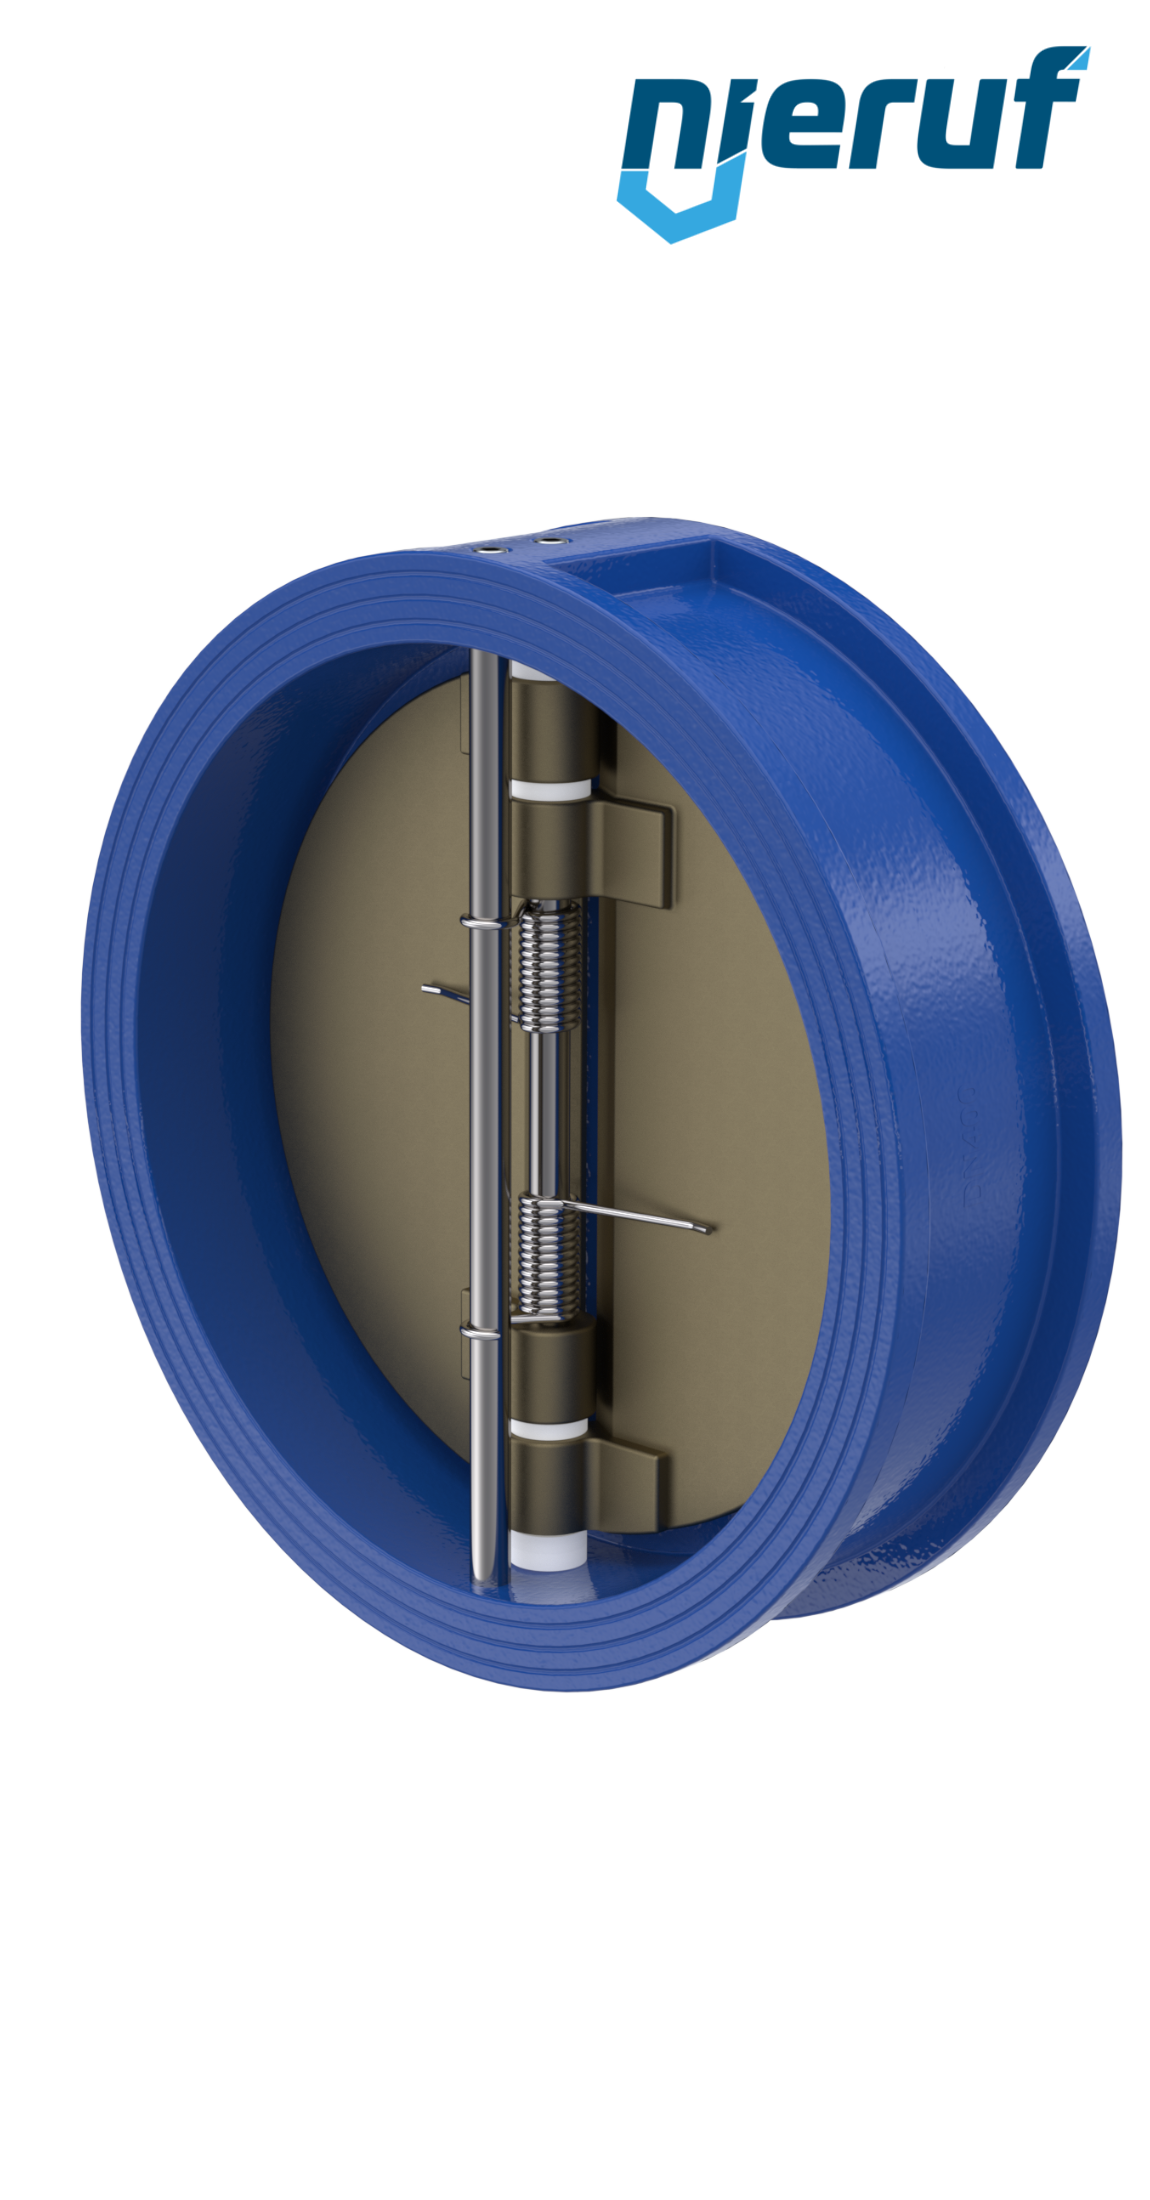 dual plate check valve DN400 DR04 GGG40 epoxyd plated blue 180µm EPDM